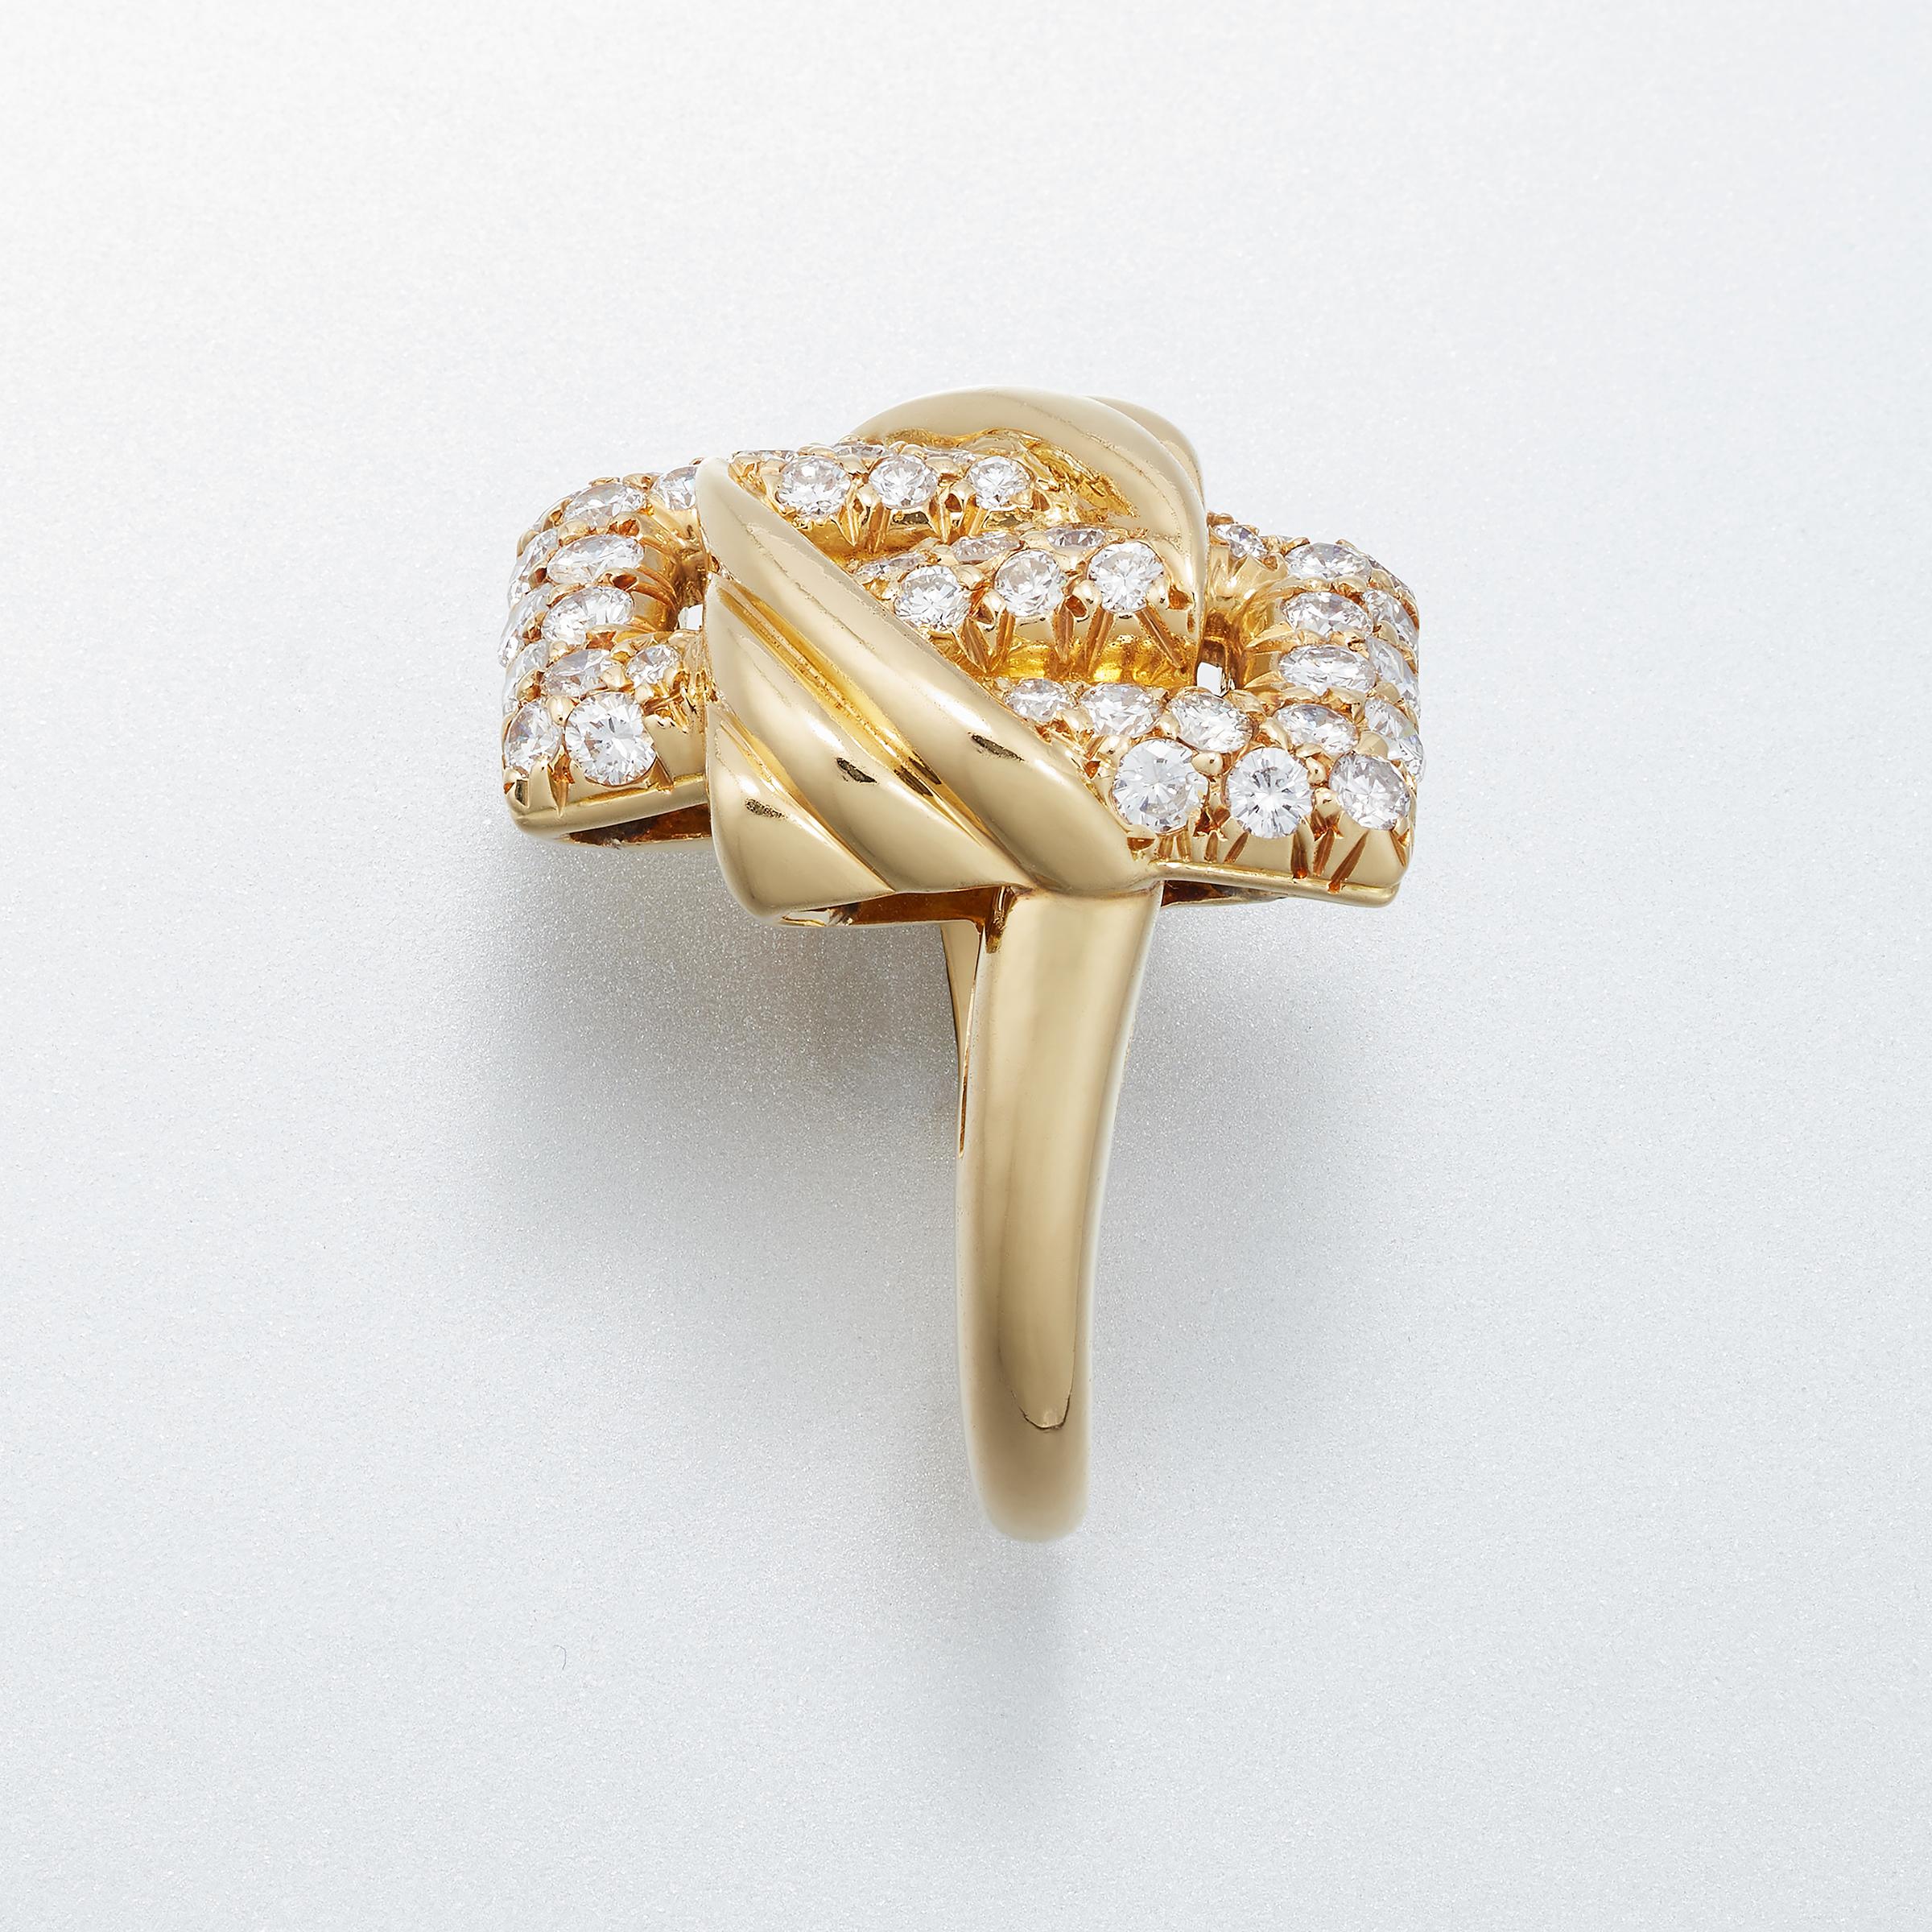 Mauboussin Paris Vintage Diamond Engagement / Cocktail Ring in 18K Yellow Gold   For Sale 1